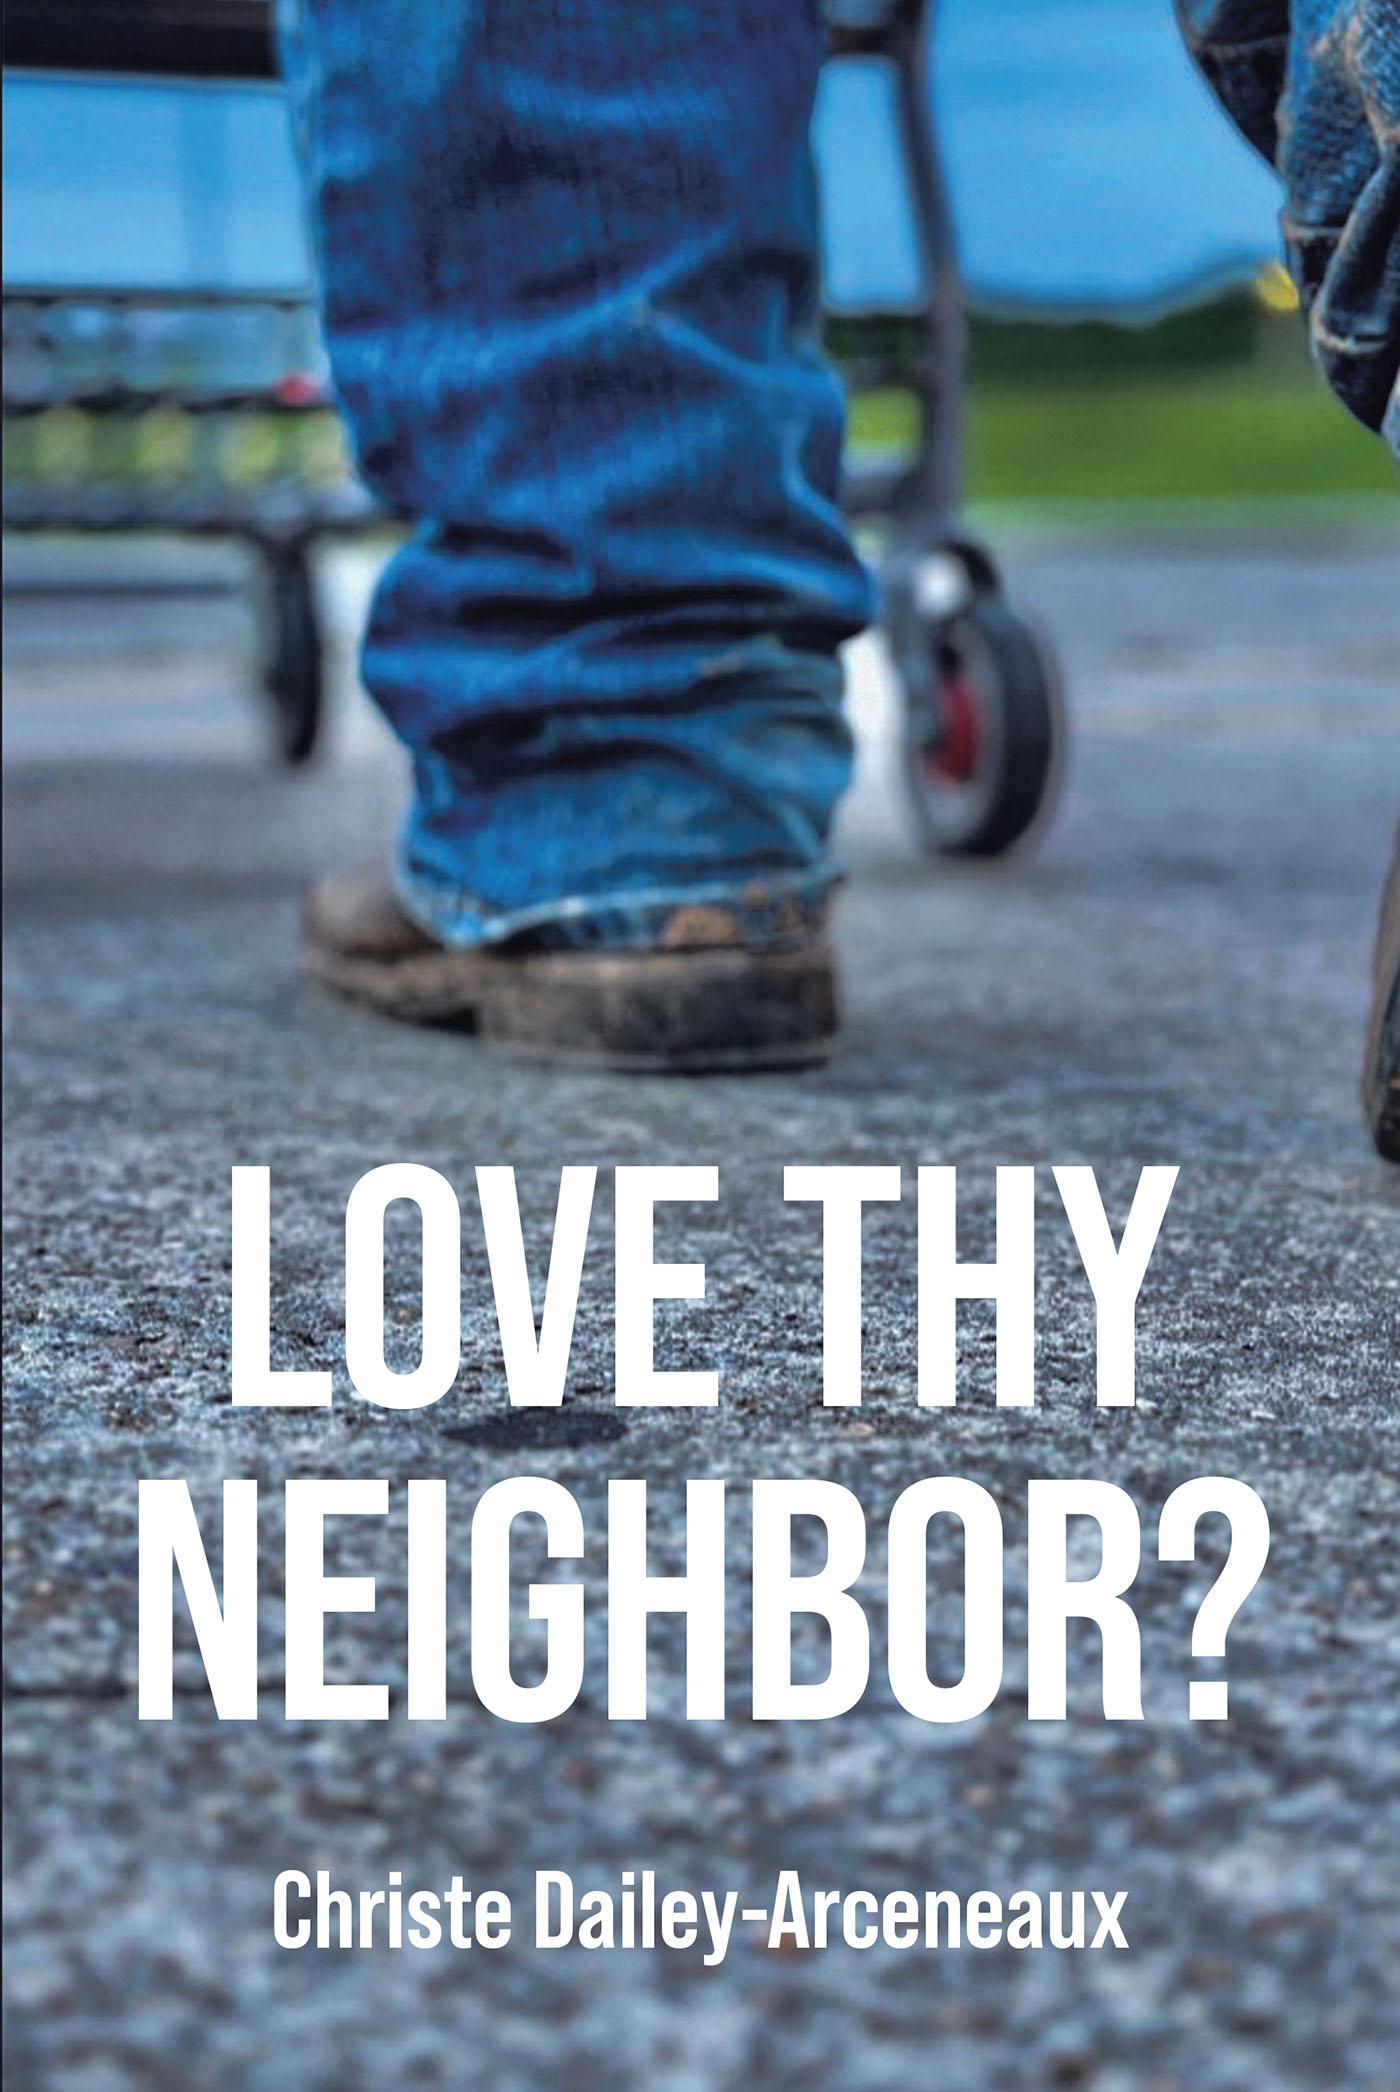 Christe Dailey-Arceneaux’s Newly Released “LOVE THY NEIGHBOR?” is an Engaging Story of an Average Family in the Midst of a Powerful Test of Faith